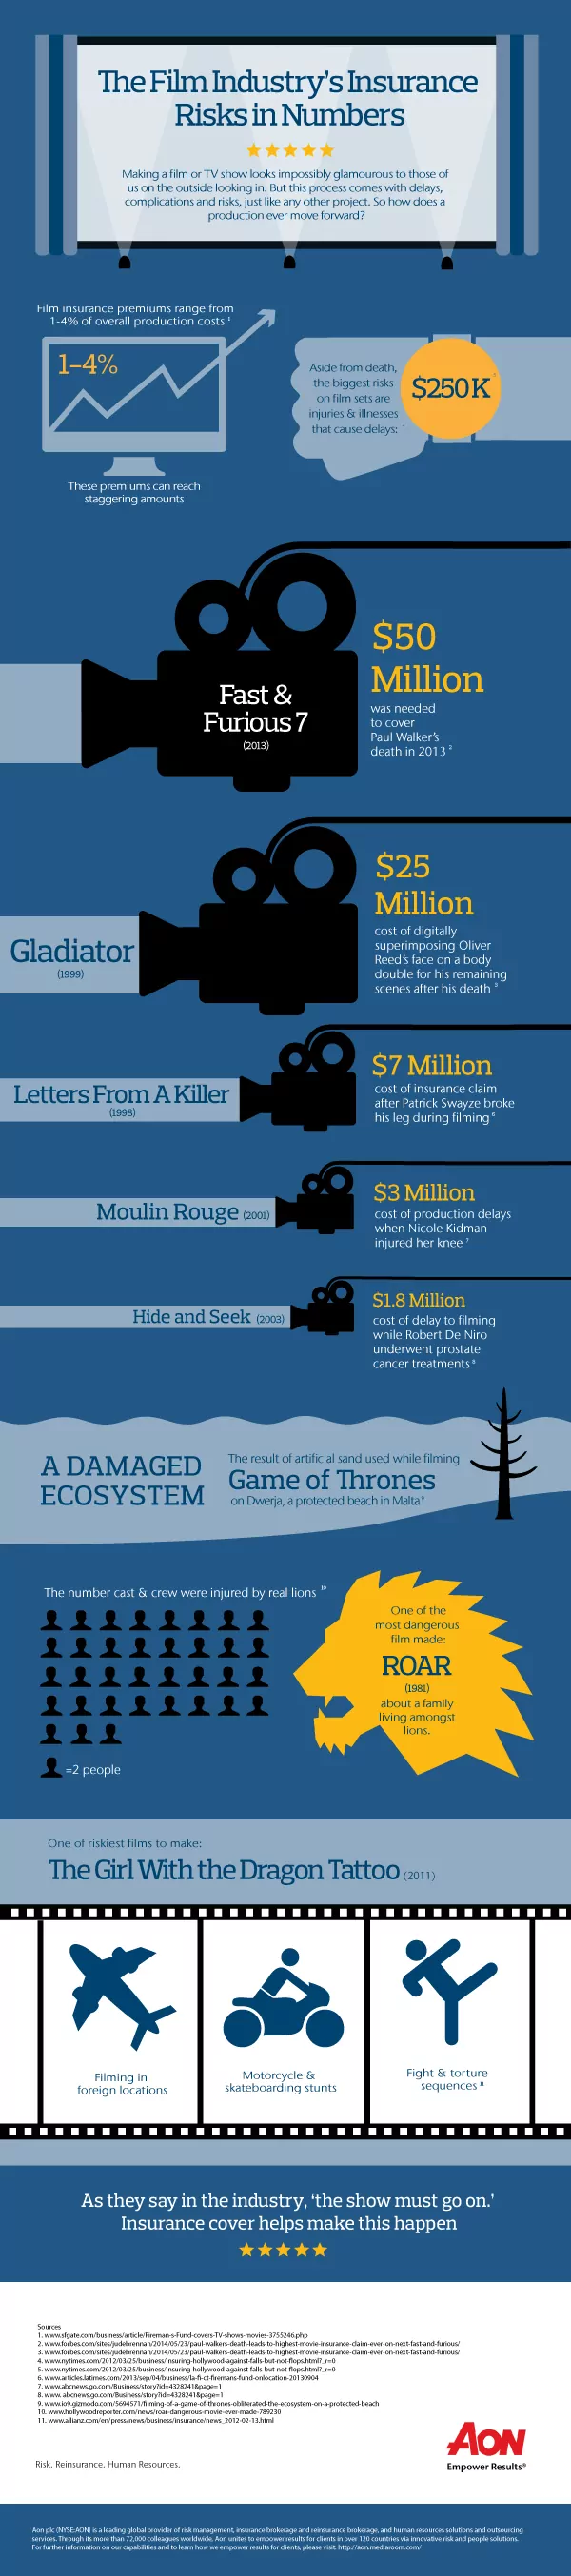 Film Industry's Insurance Risks Infographic